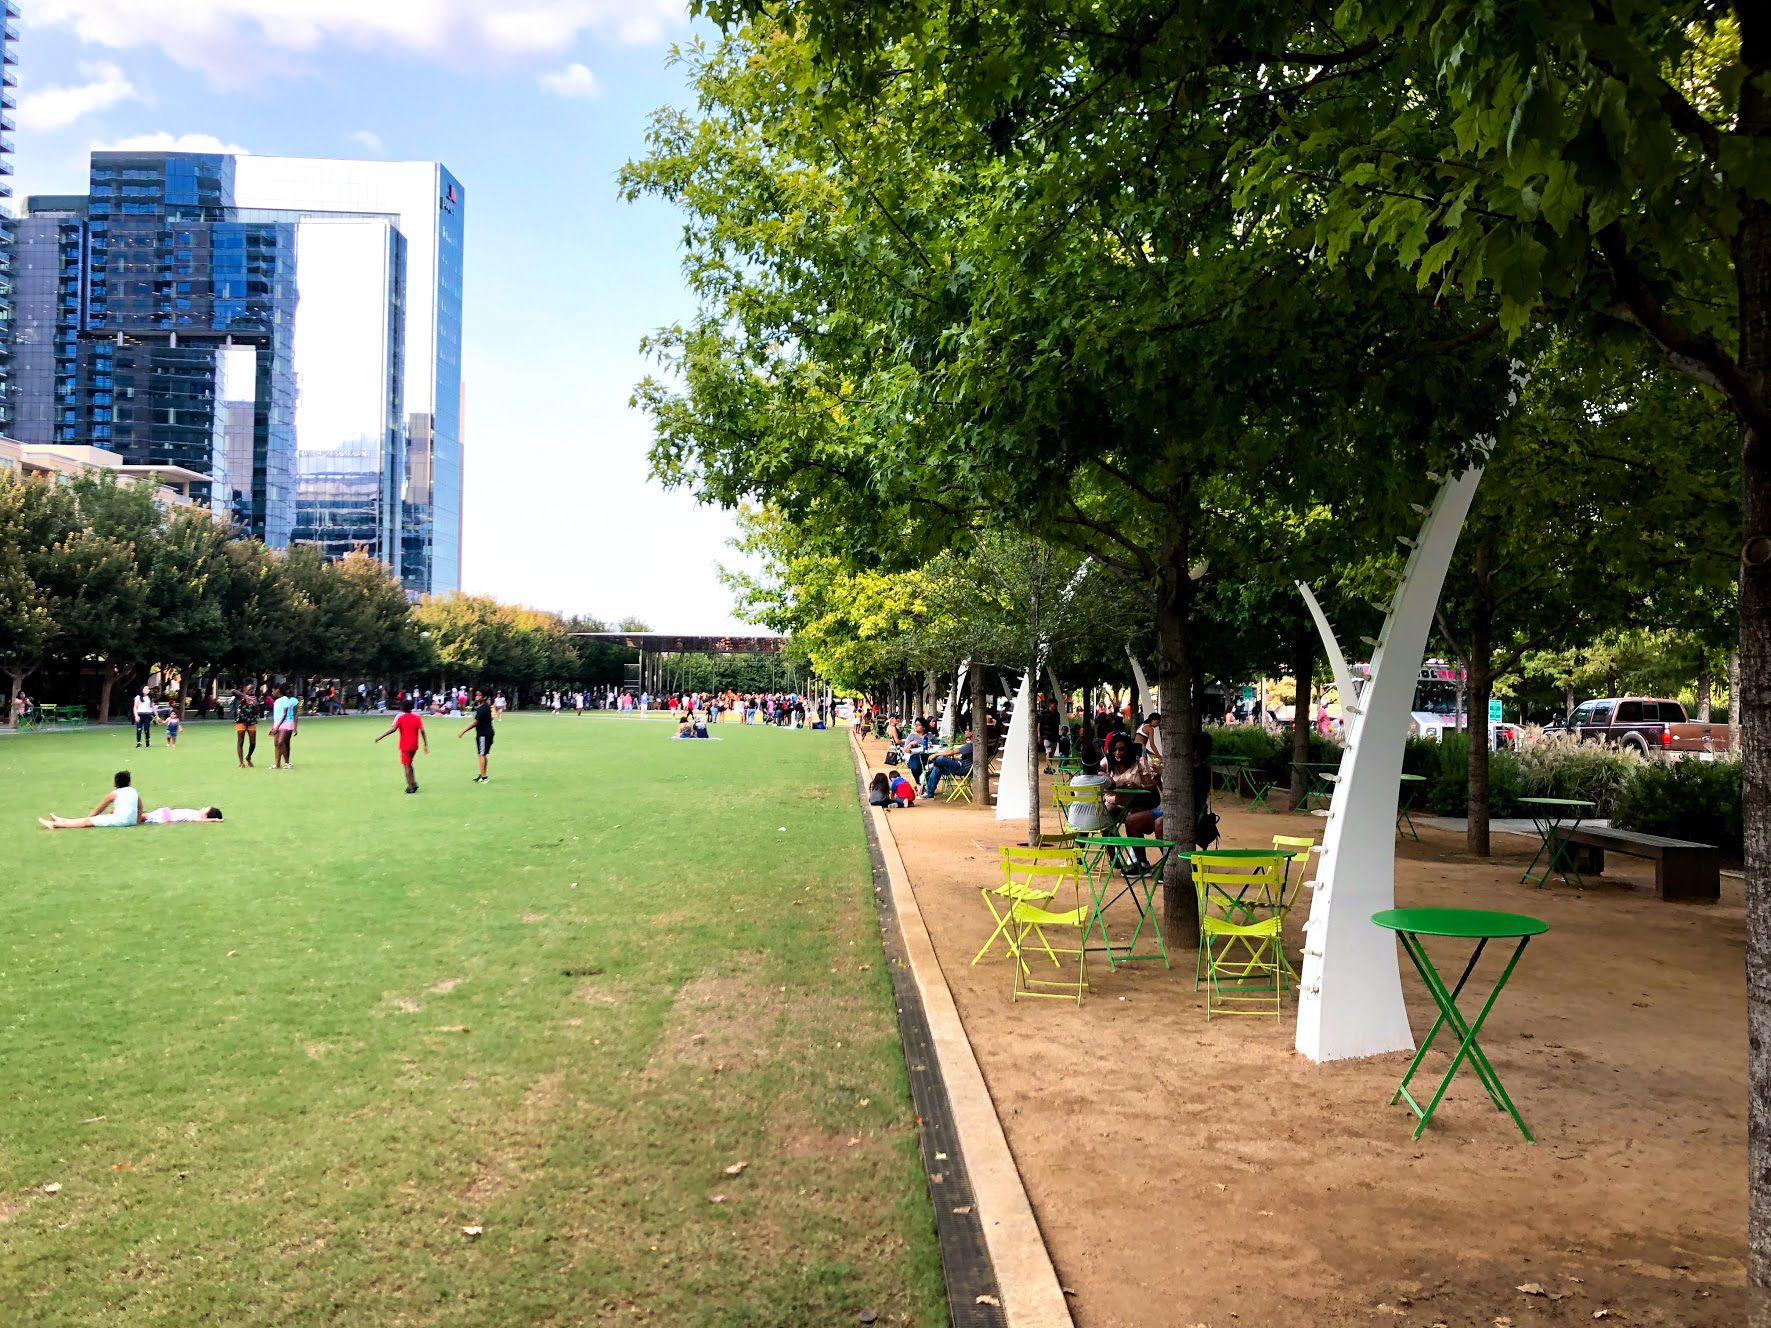 A lawn and a row of arches at Klyde Warren Park. There are small tables with chairs, benches and people walking across the lawn